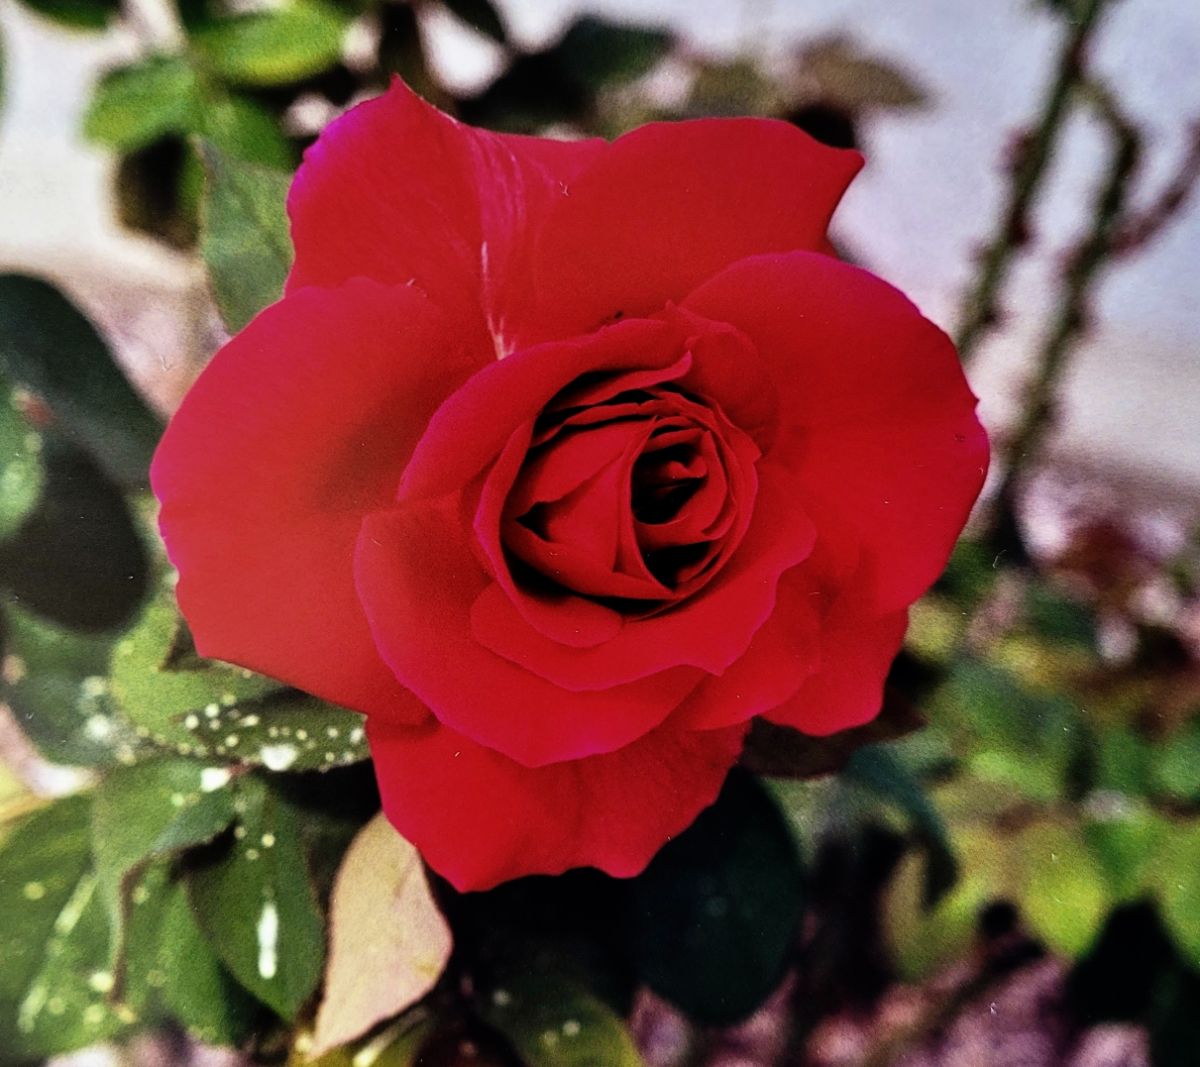 ‘Mr. Lincoln’ red rose